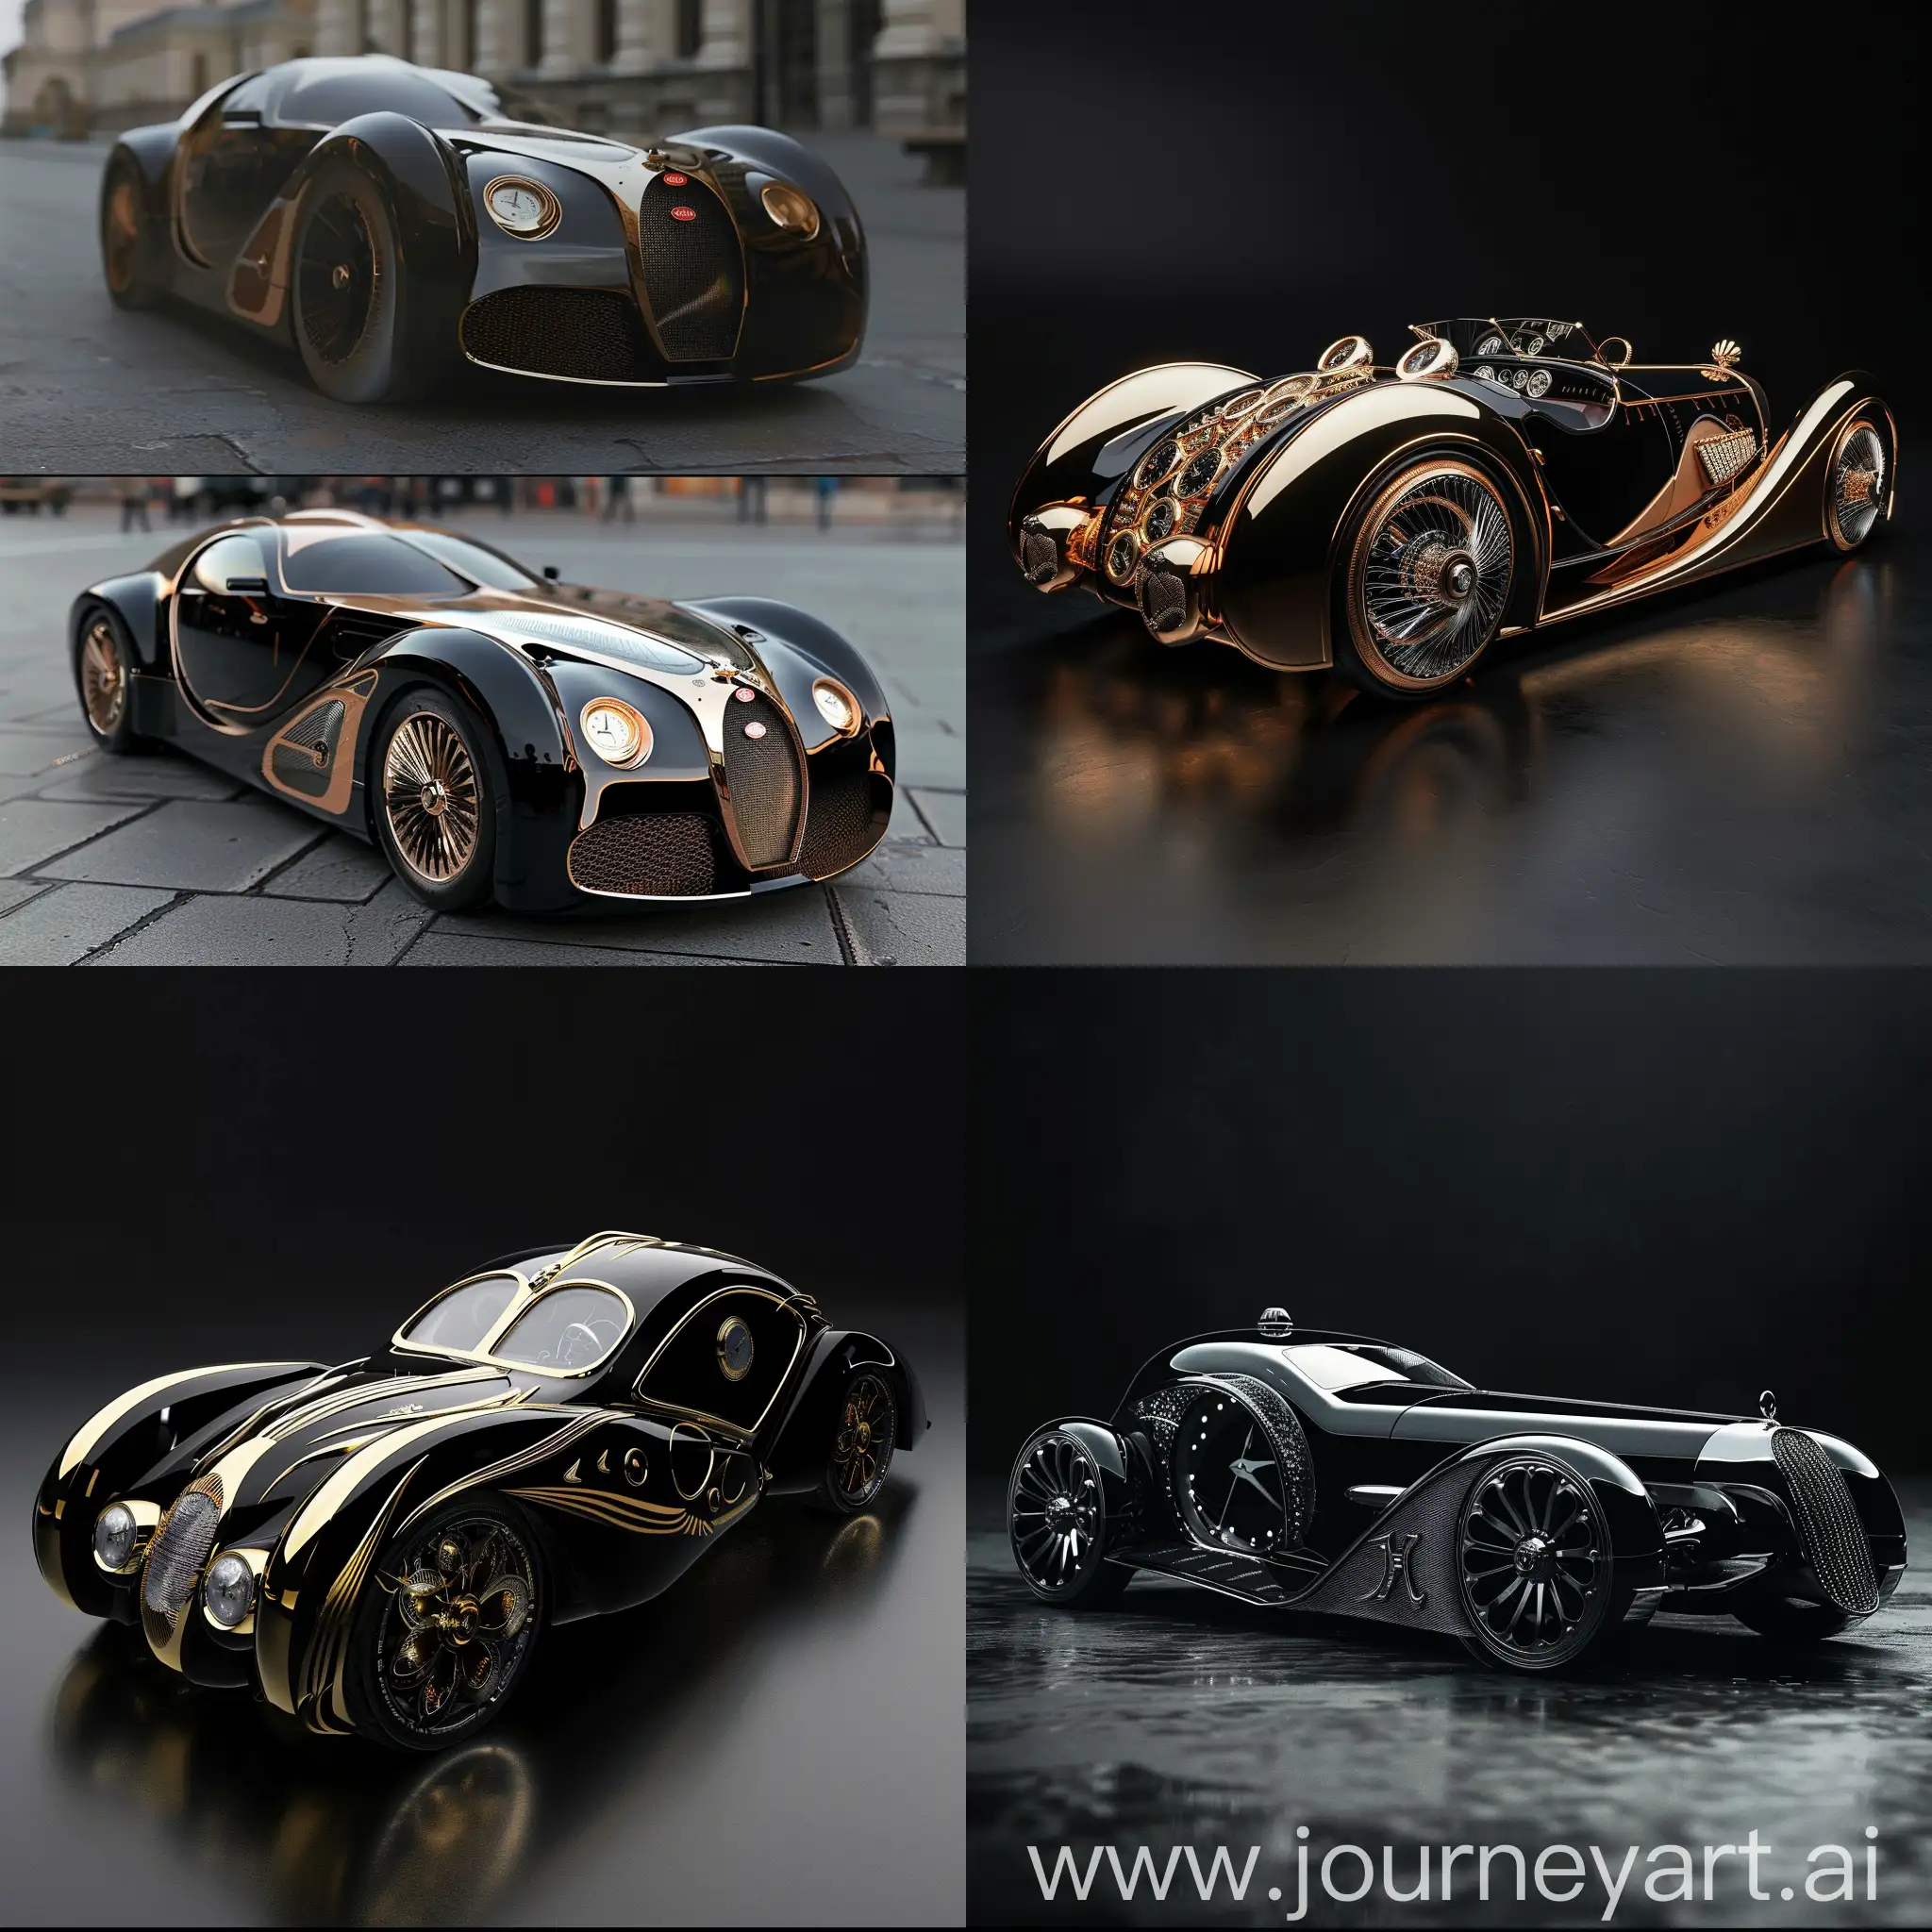 Car design inspired by pocket watches and Beaux-Arts